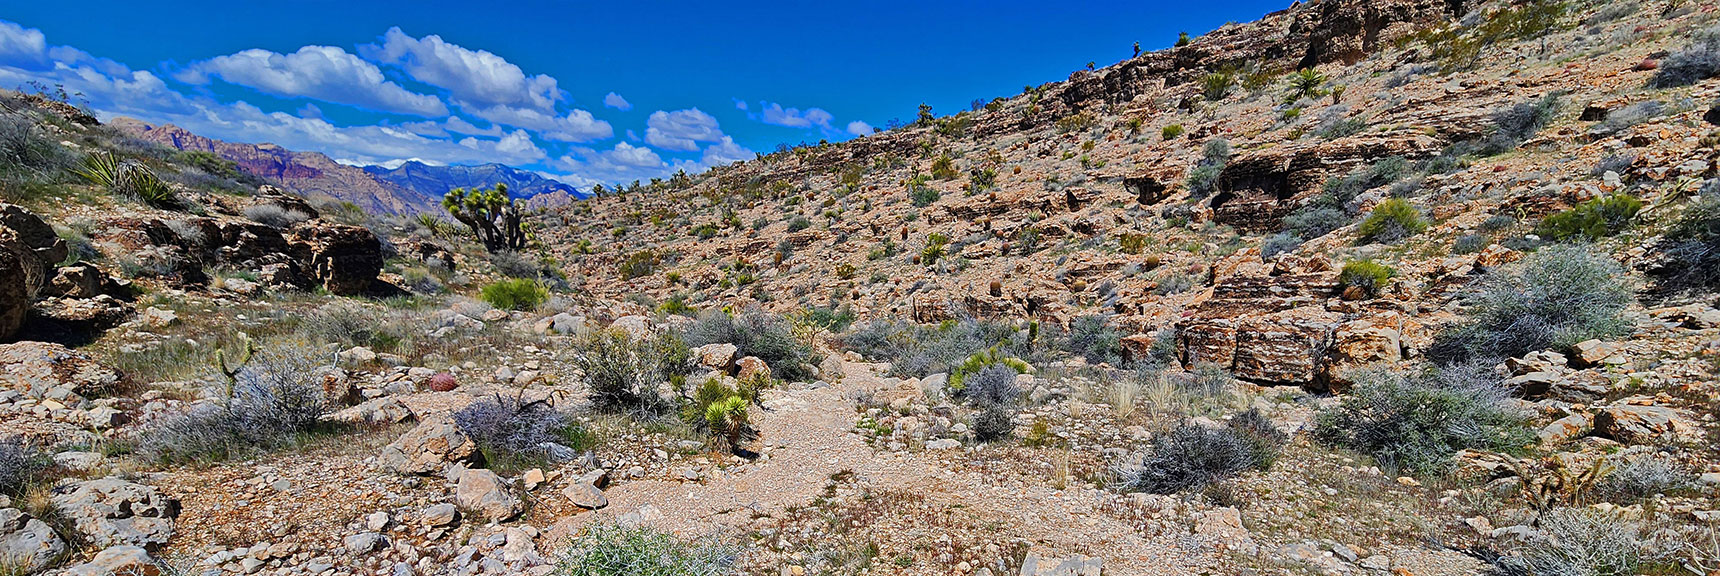 Take a Left at Upper End of Fossil Canyon. Cross Over to Upper Cowboy Canyon. | Fossil Canyon | Cowboy Canyon | Blue Diamond Hill, Nevada